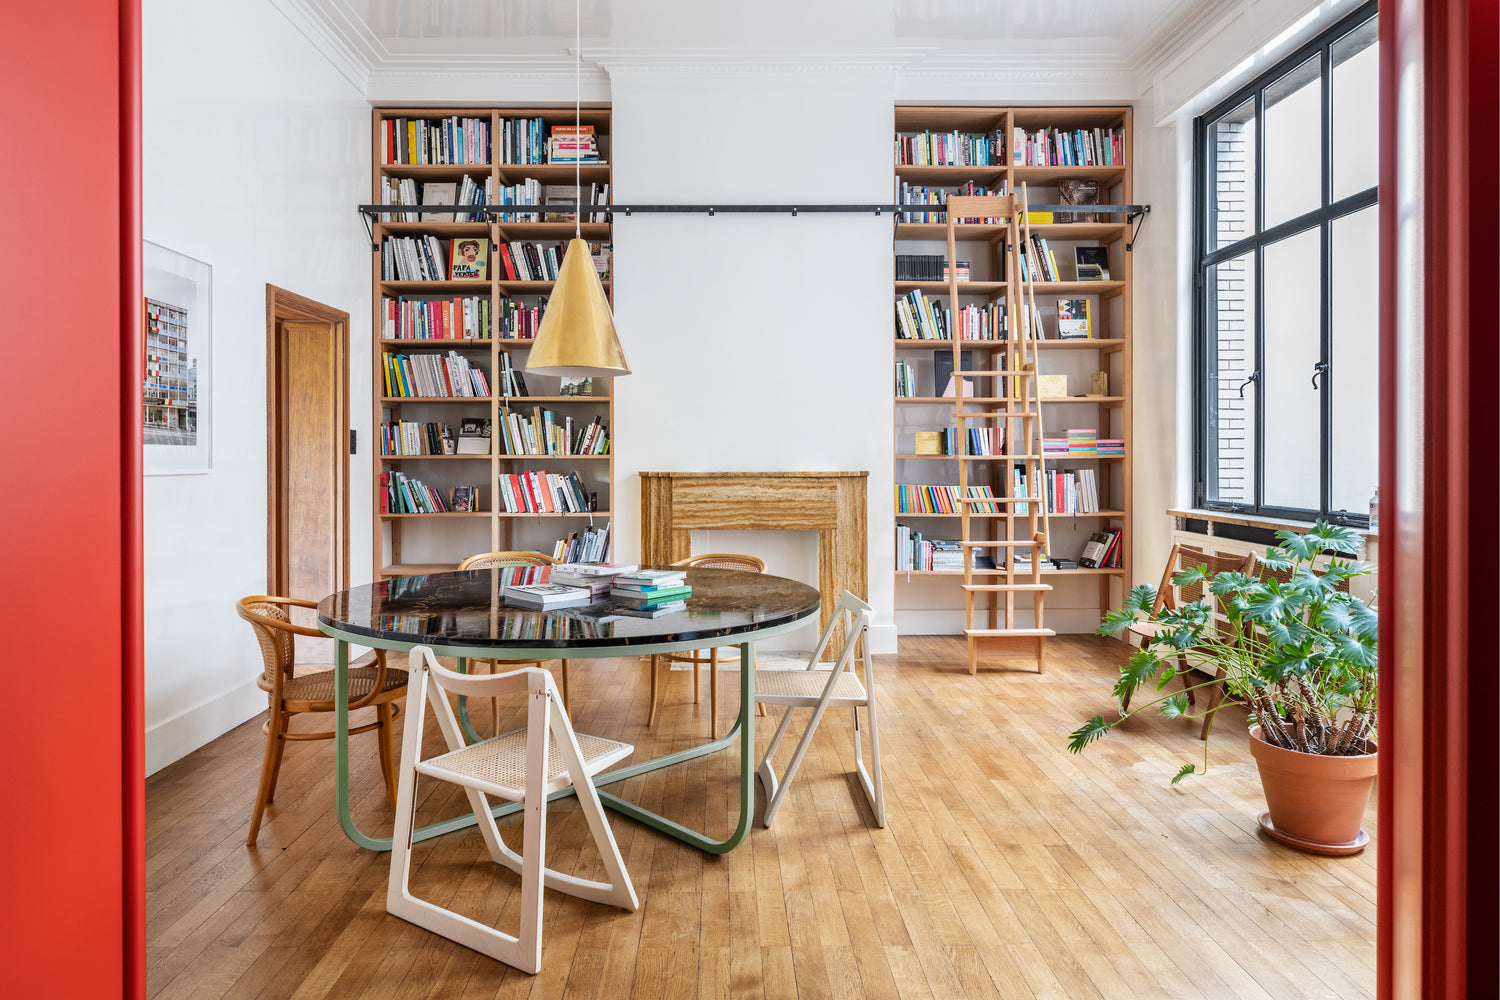 Library and meeting room at the Luster office in Antwerp. A round table with several chairs, a large window and two large bookcases in the back. Left and right red folding door panels. A potted monstera plant on the floor.